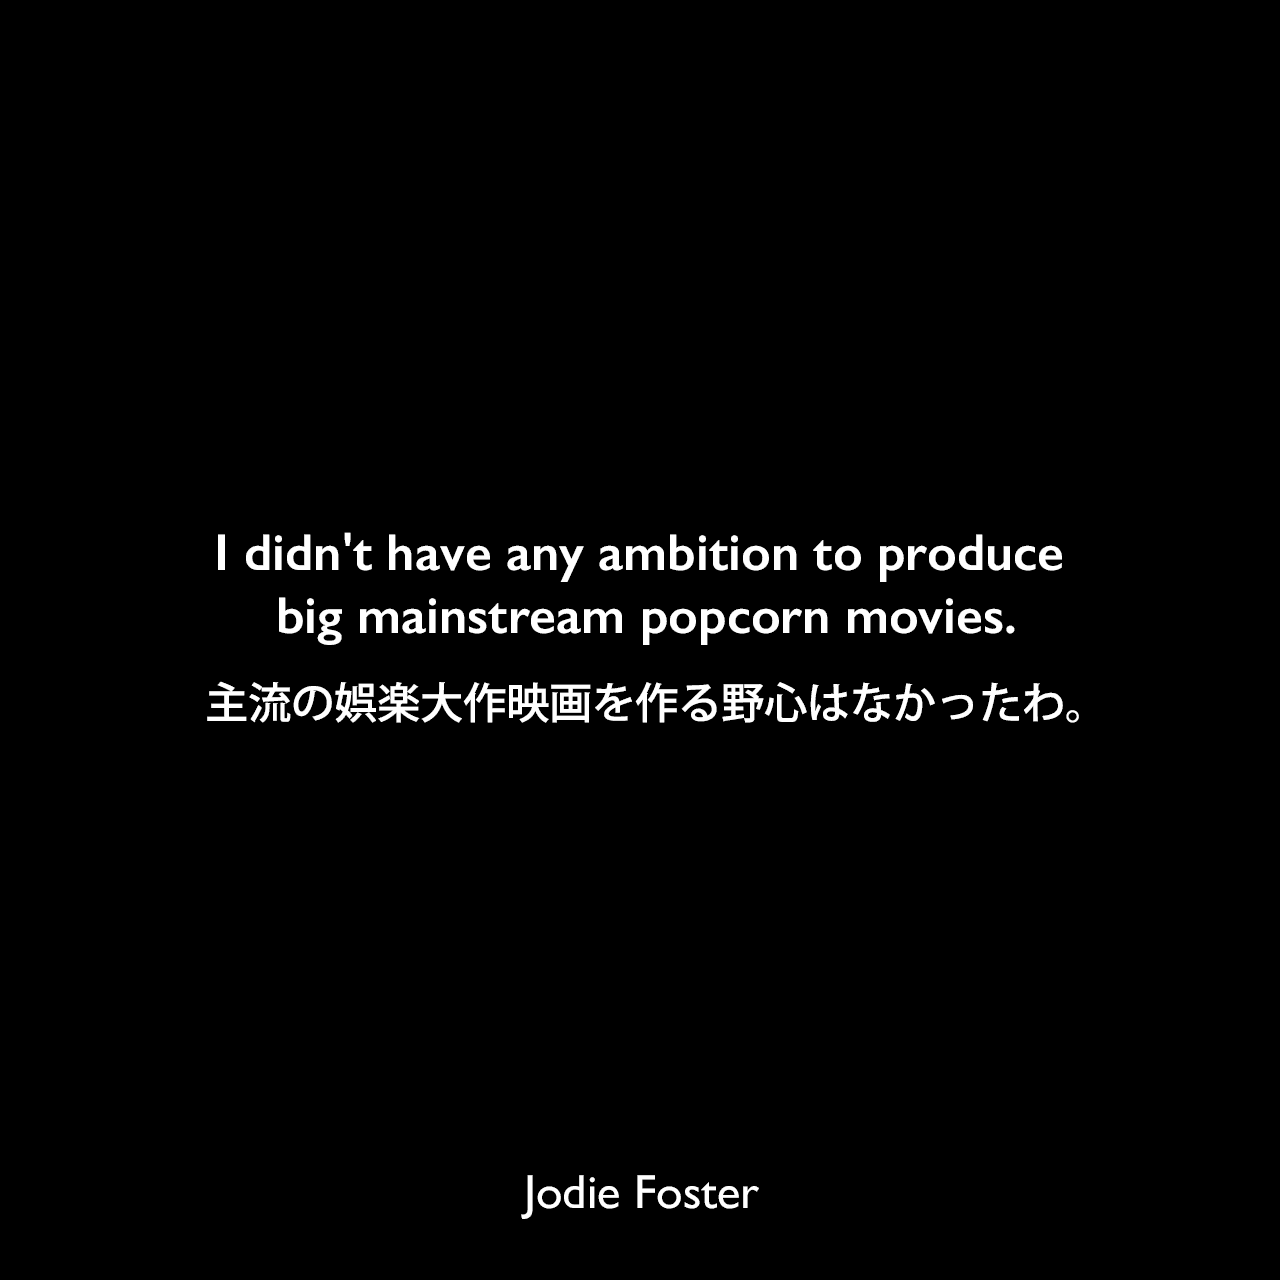 I didn't have any ambition to produce big mainstream popcorn movies.主流の娯楽大作映画を作る野心はなかったわ。Jodie Foster